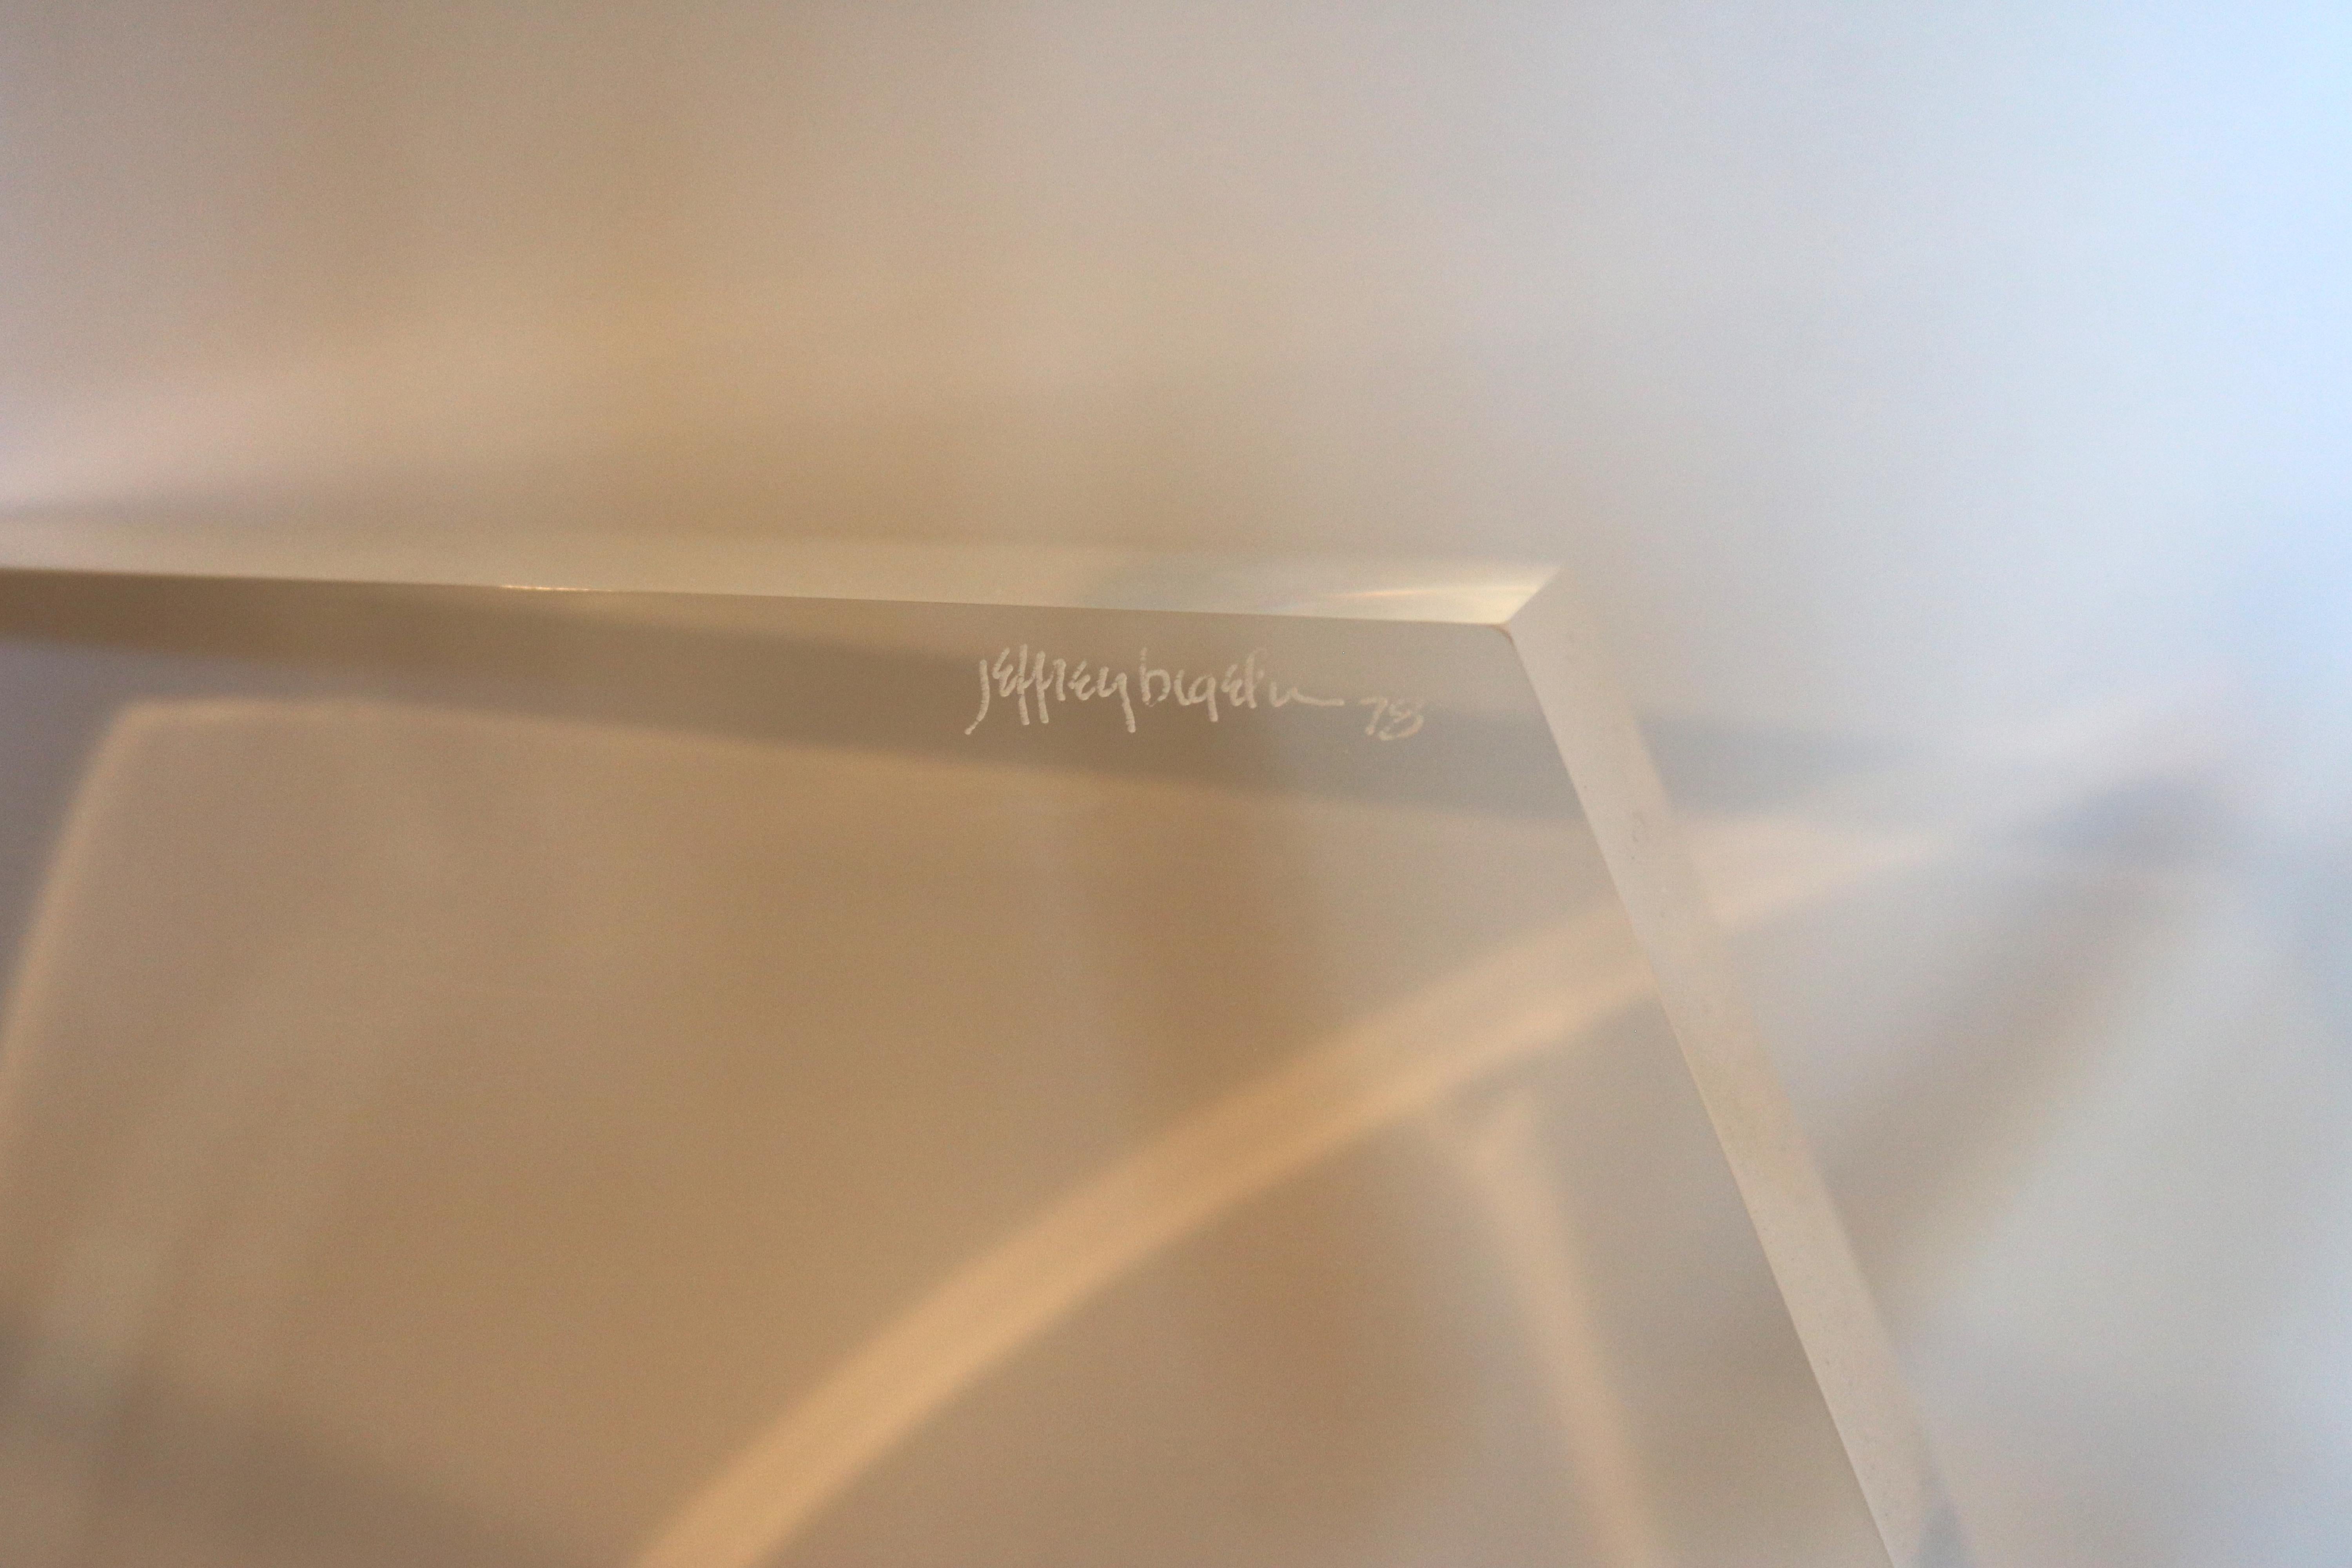 Jeffrey Bigelow Clear Lucite Dining Table Bases-Signed/Dated 1978 For Sale 1